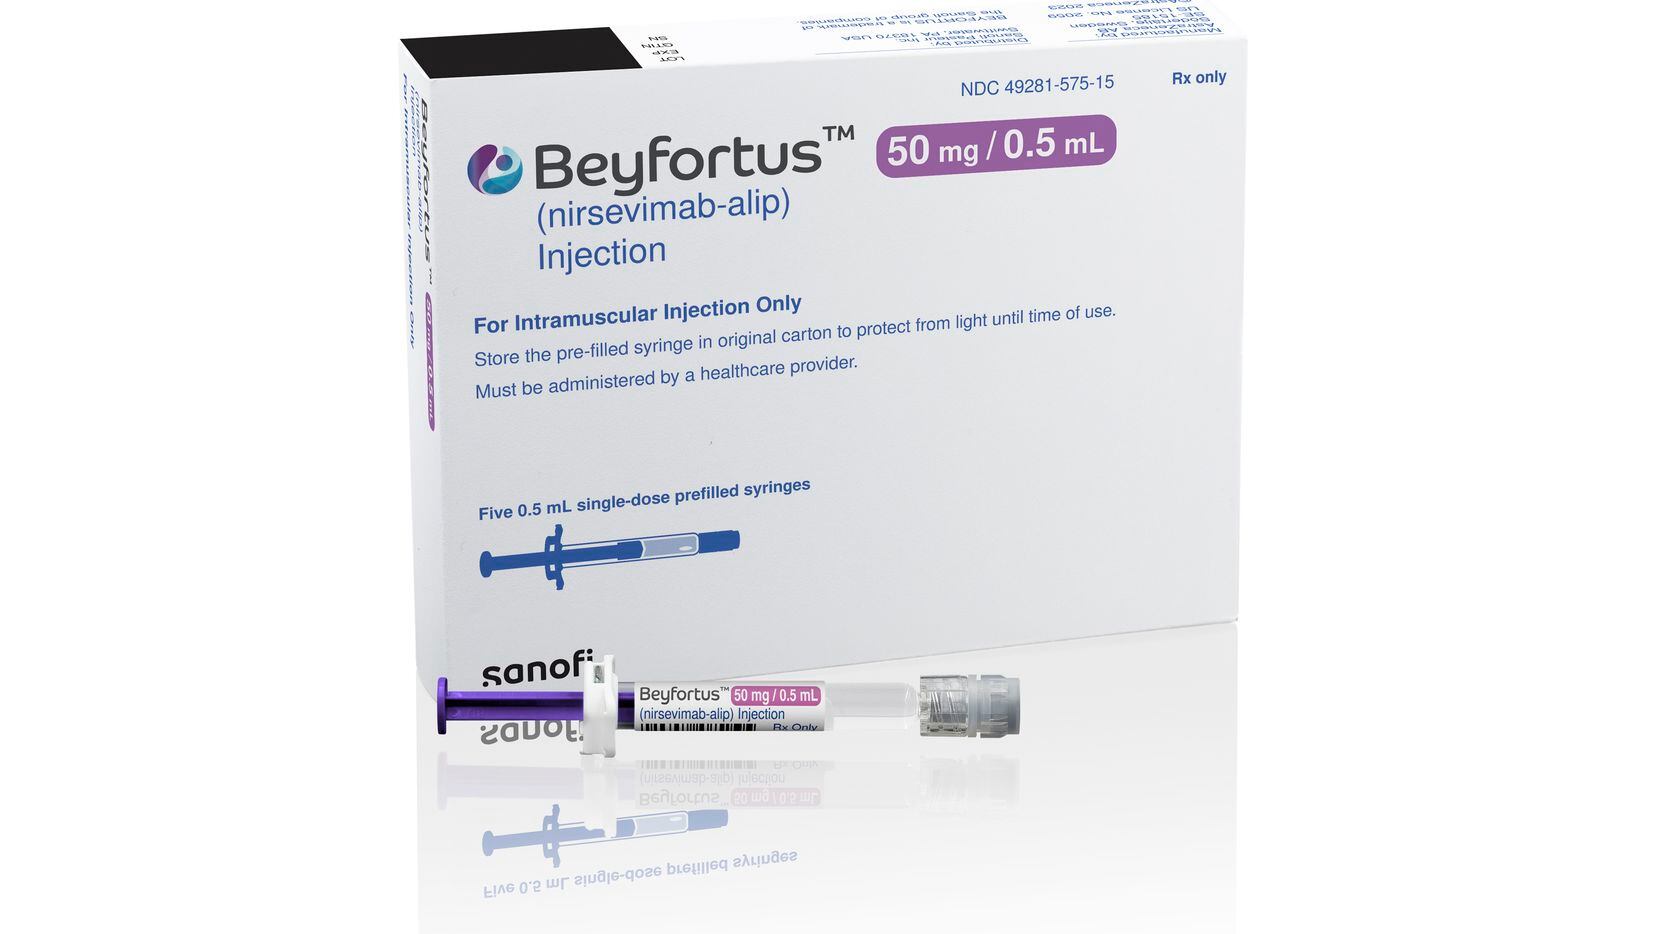 This illustration provided by AstraZeneca depicts packaging for their medication Beyfortus....